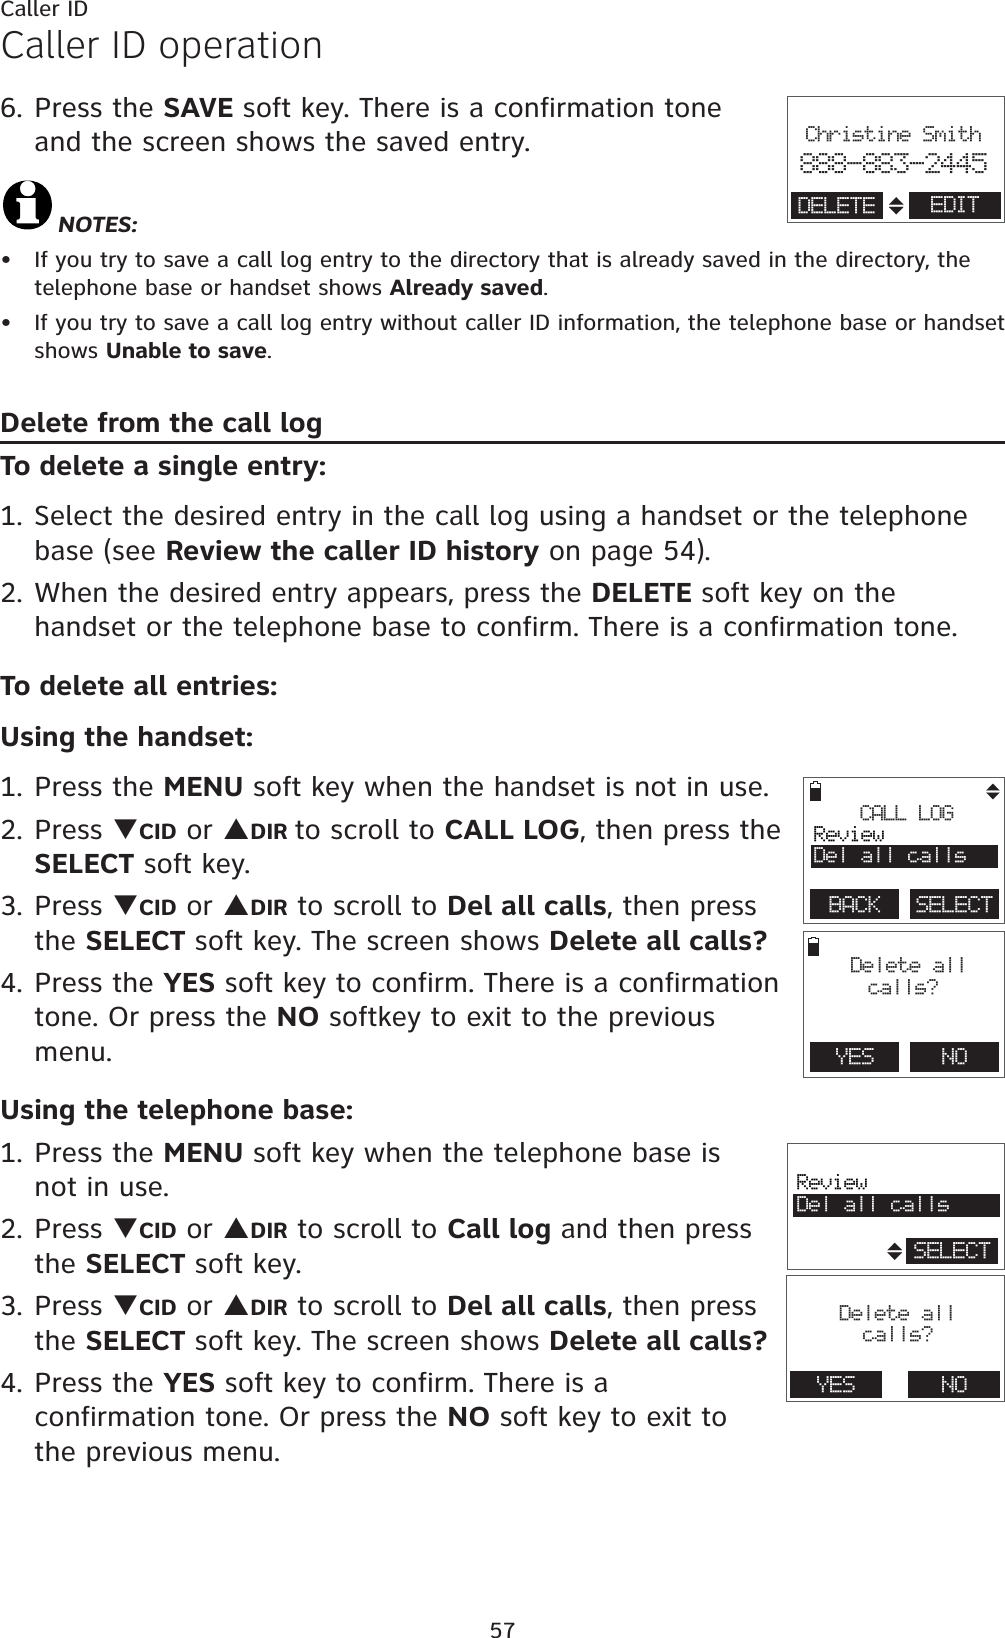 57Caller IDCaller ID operation6. Press the SAVE soft key. There is a confirmation tone  and the screen shows the saved entry.NOTES: If you try to save a call log entry to the directory that is already saved in the directory, the telephone base or handset shows Already saved.If you try to save a call log entry without caller ID information, the telephone base or handset shows Unable to save.Delete from the call logTo delete a single entry:1. Select the desired entry in the call log using a handset or the telephone base (see Review the caller ID history on page 54).2. When the desired entry appears, press the DELETE soft key on the handset or the telephone base to confirm. There is a confirmation tone.To delete all entries:Using the handset:1. Press the MENU soft key when the handset is not in use.2. Press TCID or SDIR to scroll to CALL LOG, then press the SELECT soft key.3. Press TCID or SDIR to scroll to Del all calls, then press the SELECT soft key. The screen shows Delete all calls?4. Press the YES soft key to confirm. There is a confirmation tone. Or press the NO softkey to exit to the previous menu.Using the telephone base:1. Press the MENU soft key when the telephone base is not in use.2. Press TCID or SDIR to scroll to Call log and then press the SELECT soft key.3. Press TCID or SDIR to scroll to Del all calls, then press the SELECT soft key. The screen shows Delete all calls?4. Press the YES soft key to confirm. There is a confirmation tone. Or press the NO soft key to exit to the previous menu. ••                       Christine Smith888-883-2445EDITDELETEYES    NO Delete all calls?CALL LOGReviewDel all callsBACK    SELECT                       ReviewDel all callsSELECT                       Delete allcalls?YES NO